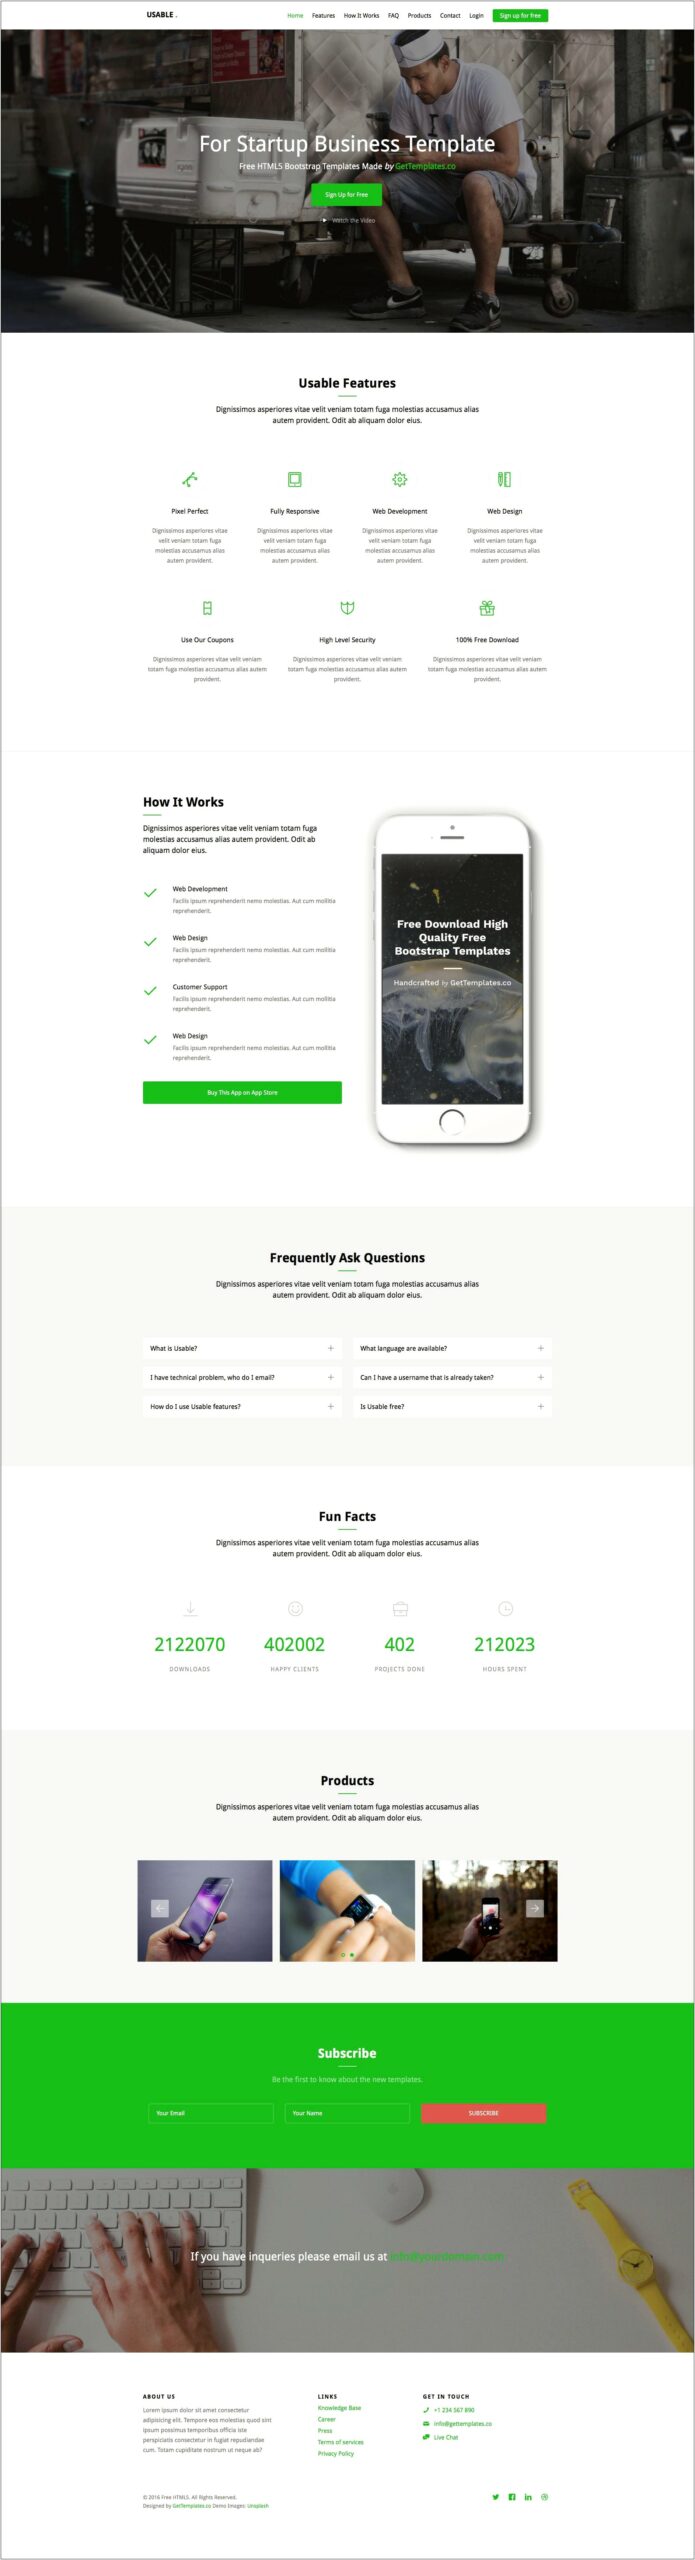 Single Page Responsive Html Template Free Download